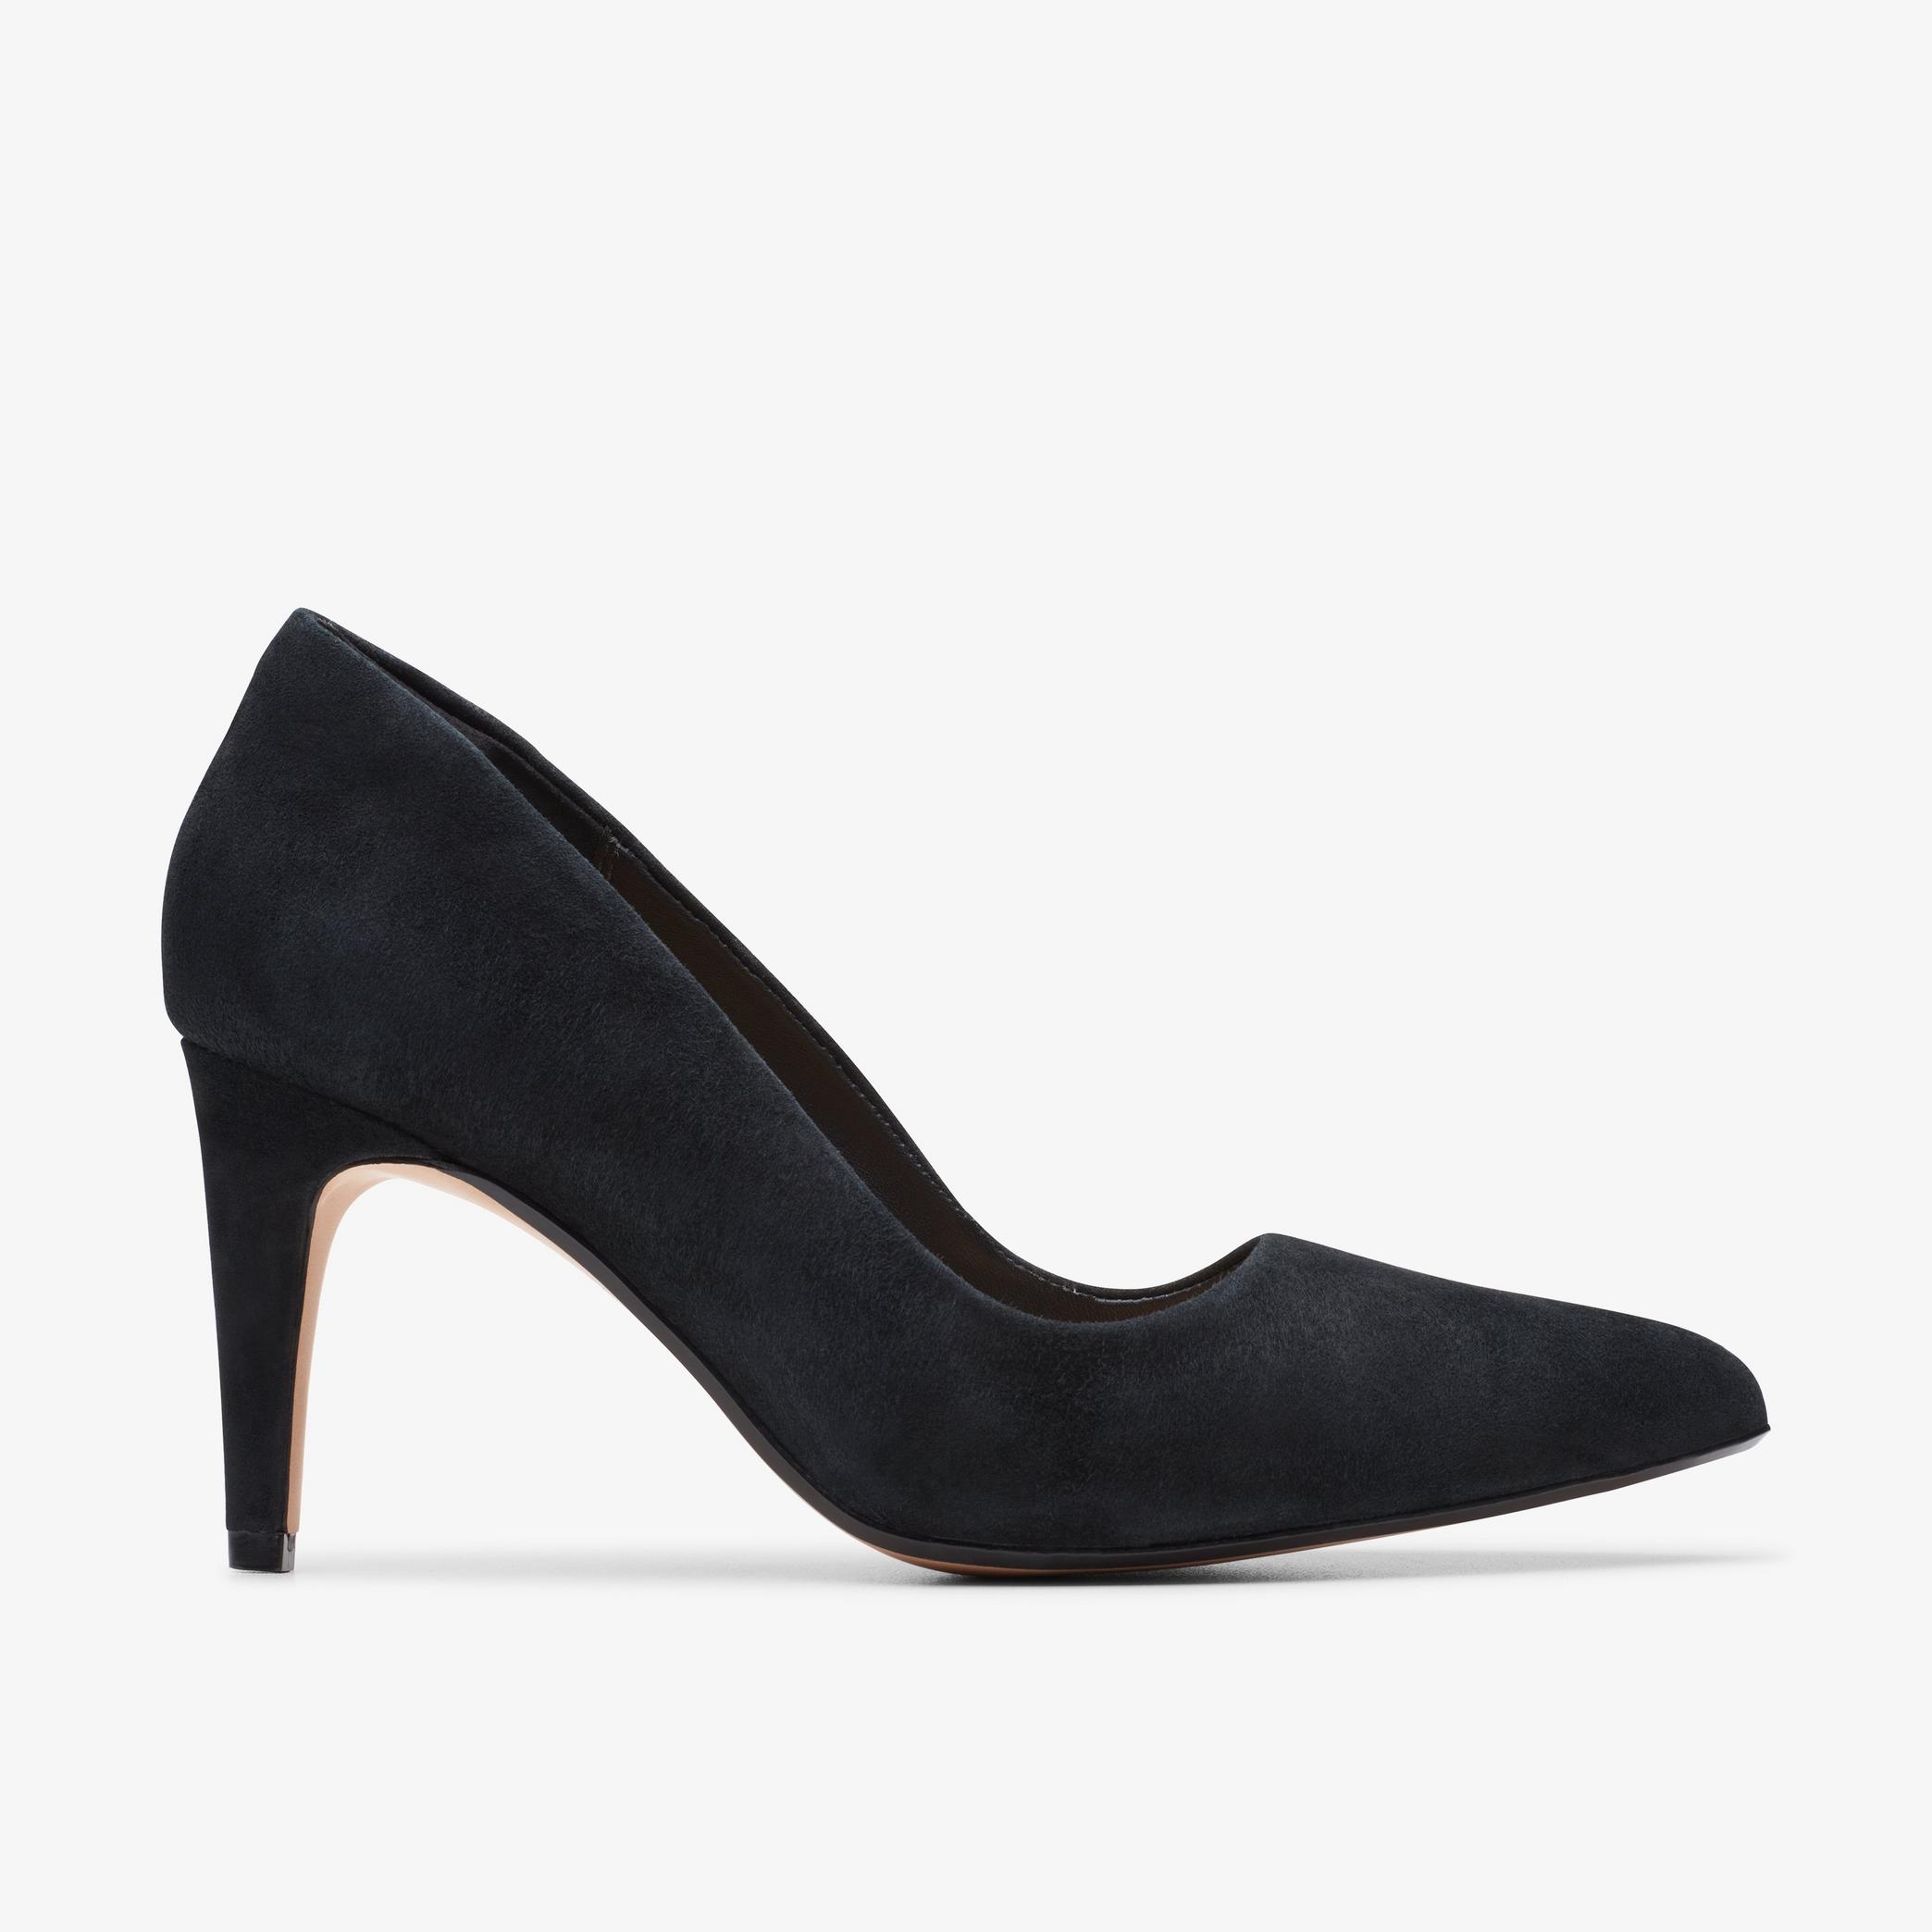 Laina Rae Black Suede Court Shoes, view 1 of 6